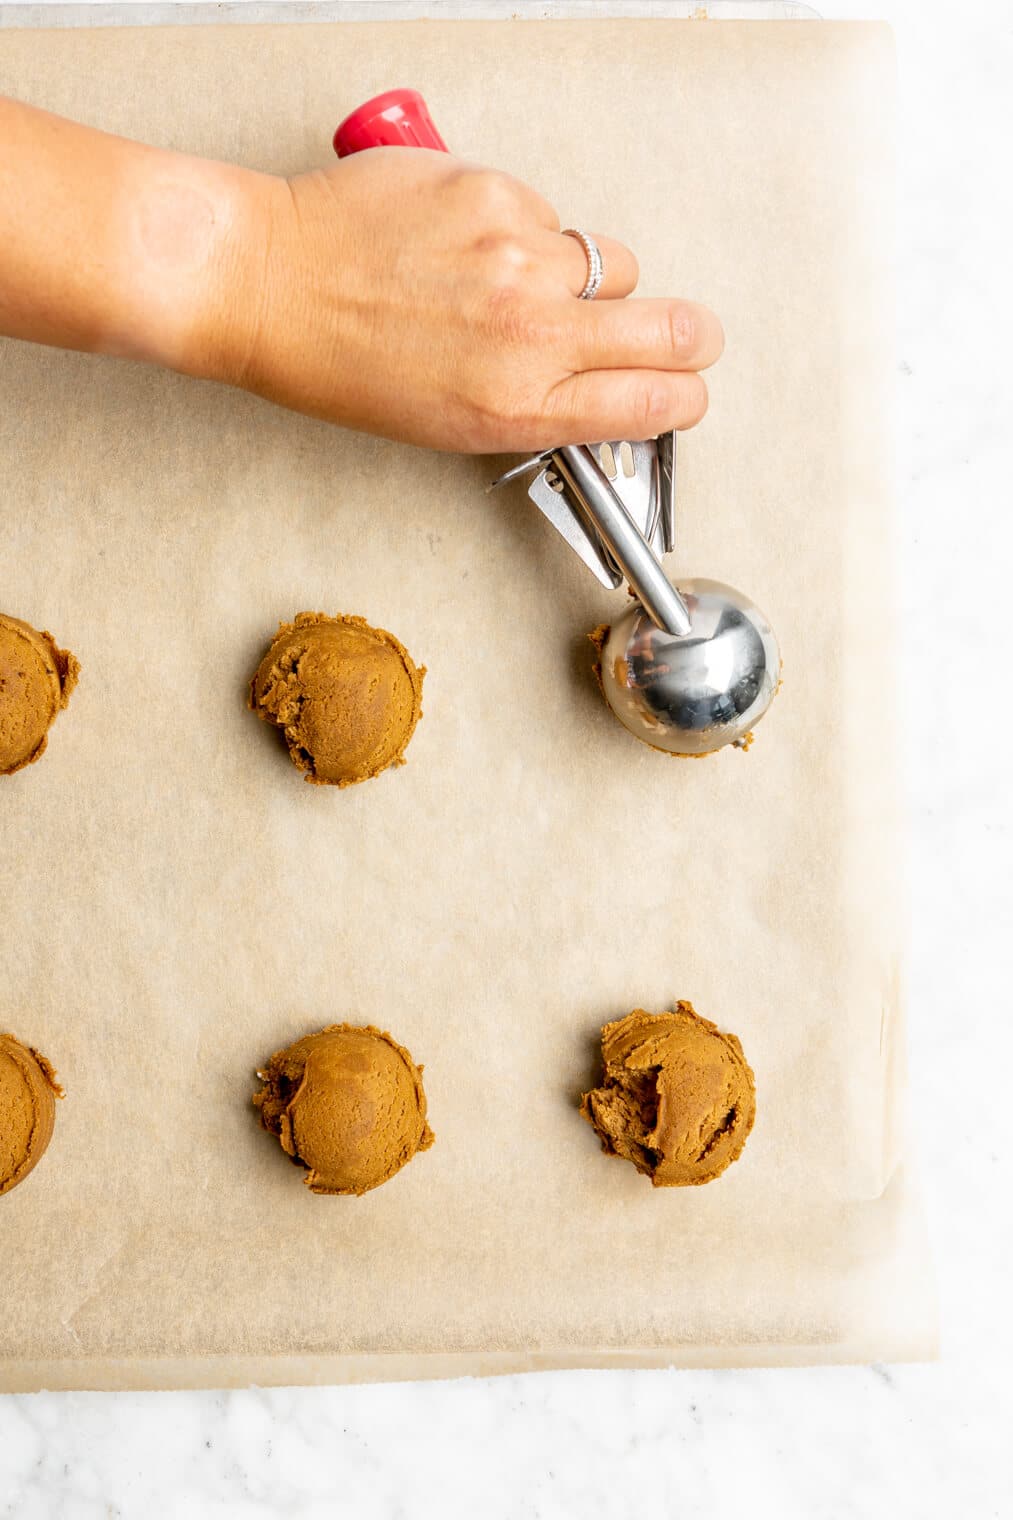 Top down view of cookies being scooped onto a parchment lined baking sheet.